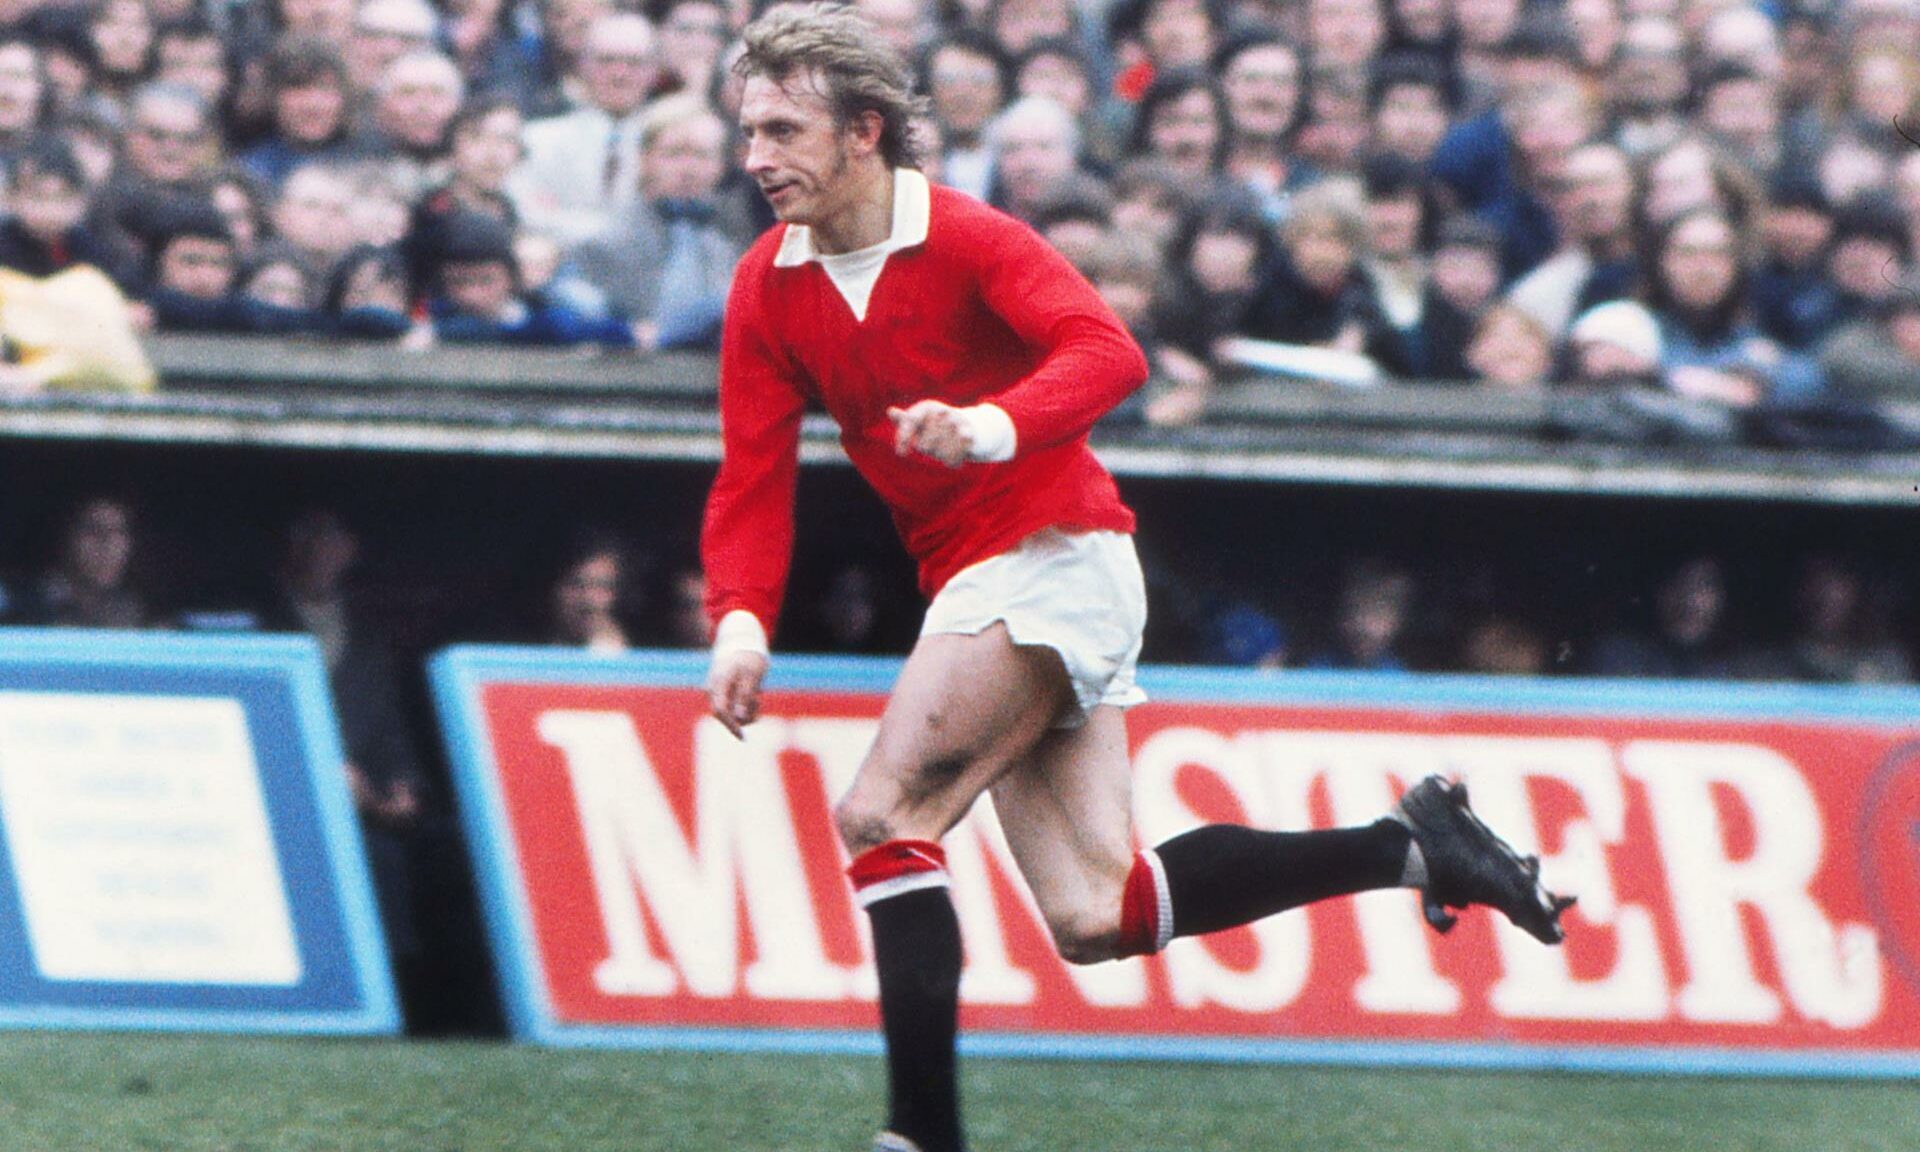 Denis Law, along with other players, has been diagnosed with neurodegenerative conditions due to football headers, which has led to talks of a ban